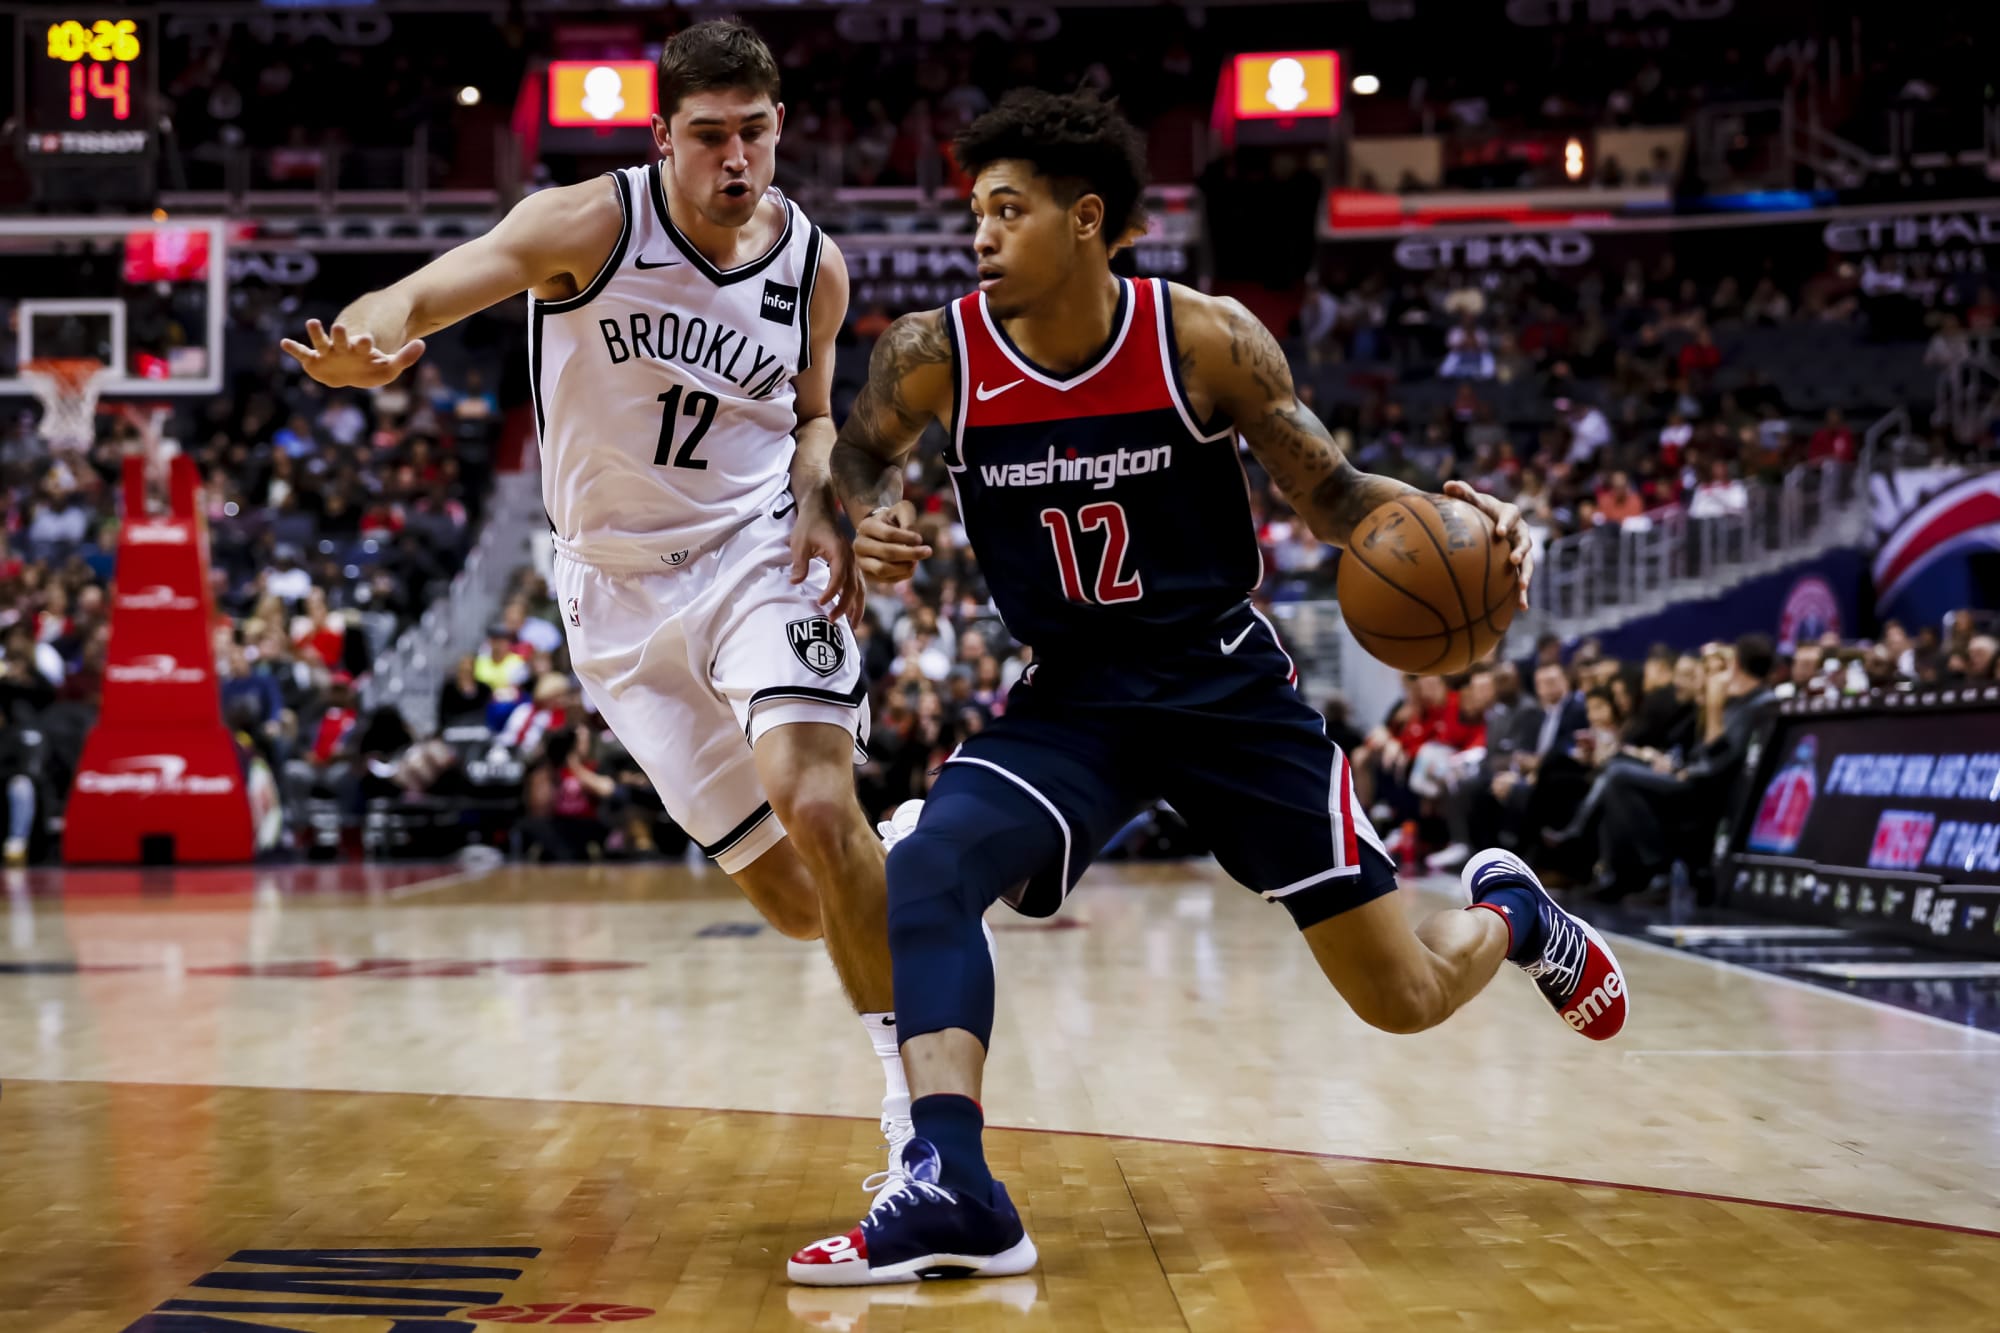 Brooklyn Nets at Washington Wizards TV info, live streaming, injury report